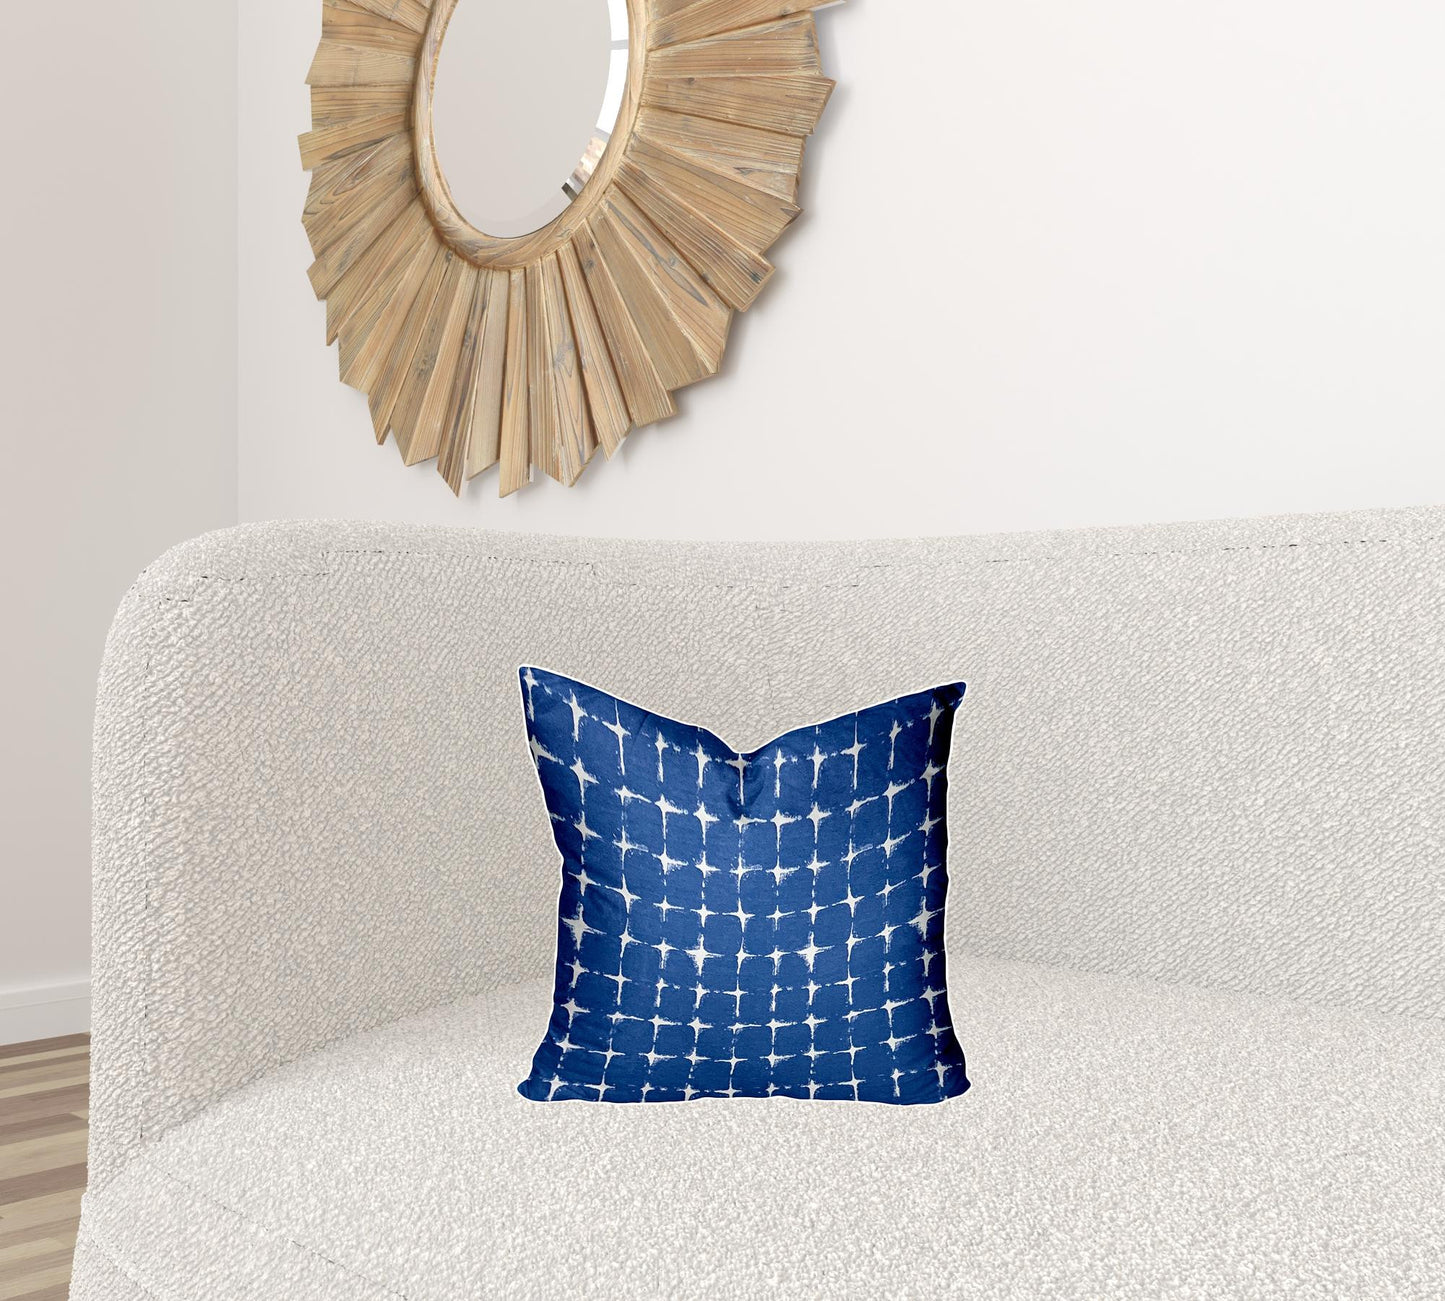 16" X 16" Blue And White Enveloped Gingham Throw Indoor Outdoor Pillow